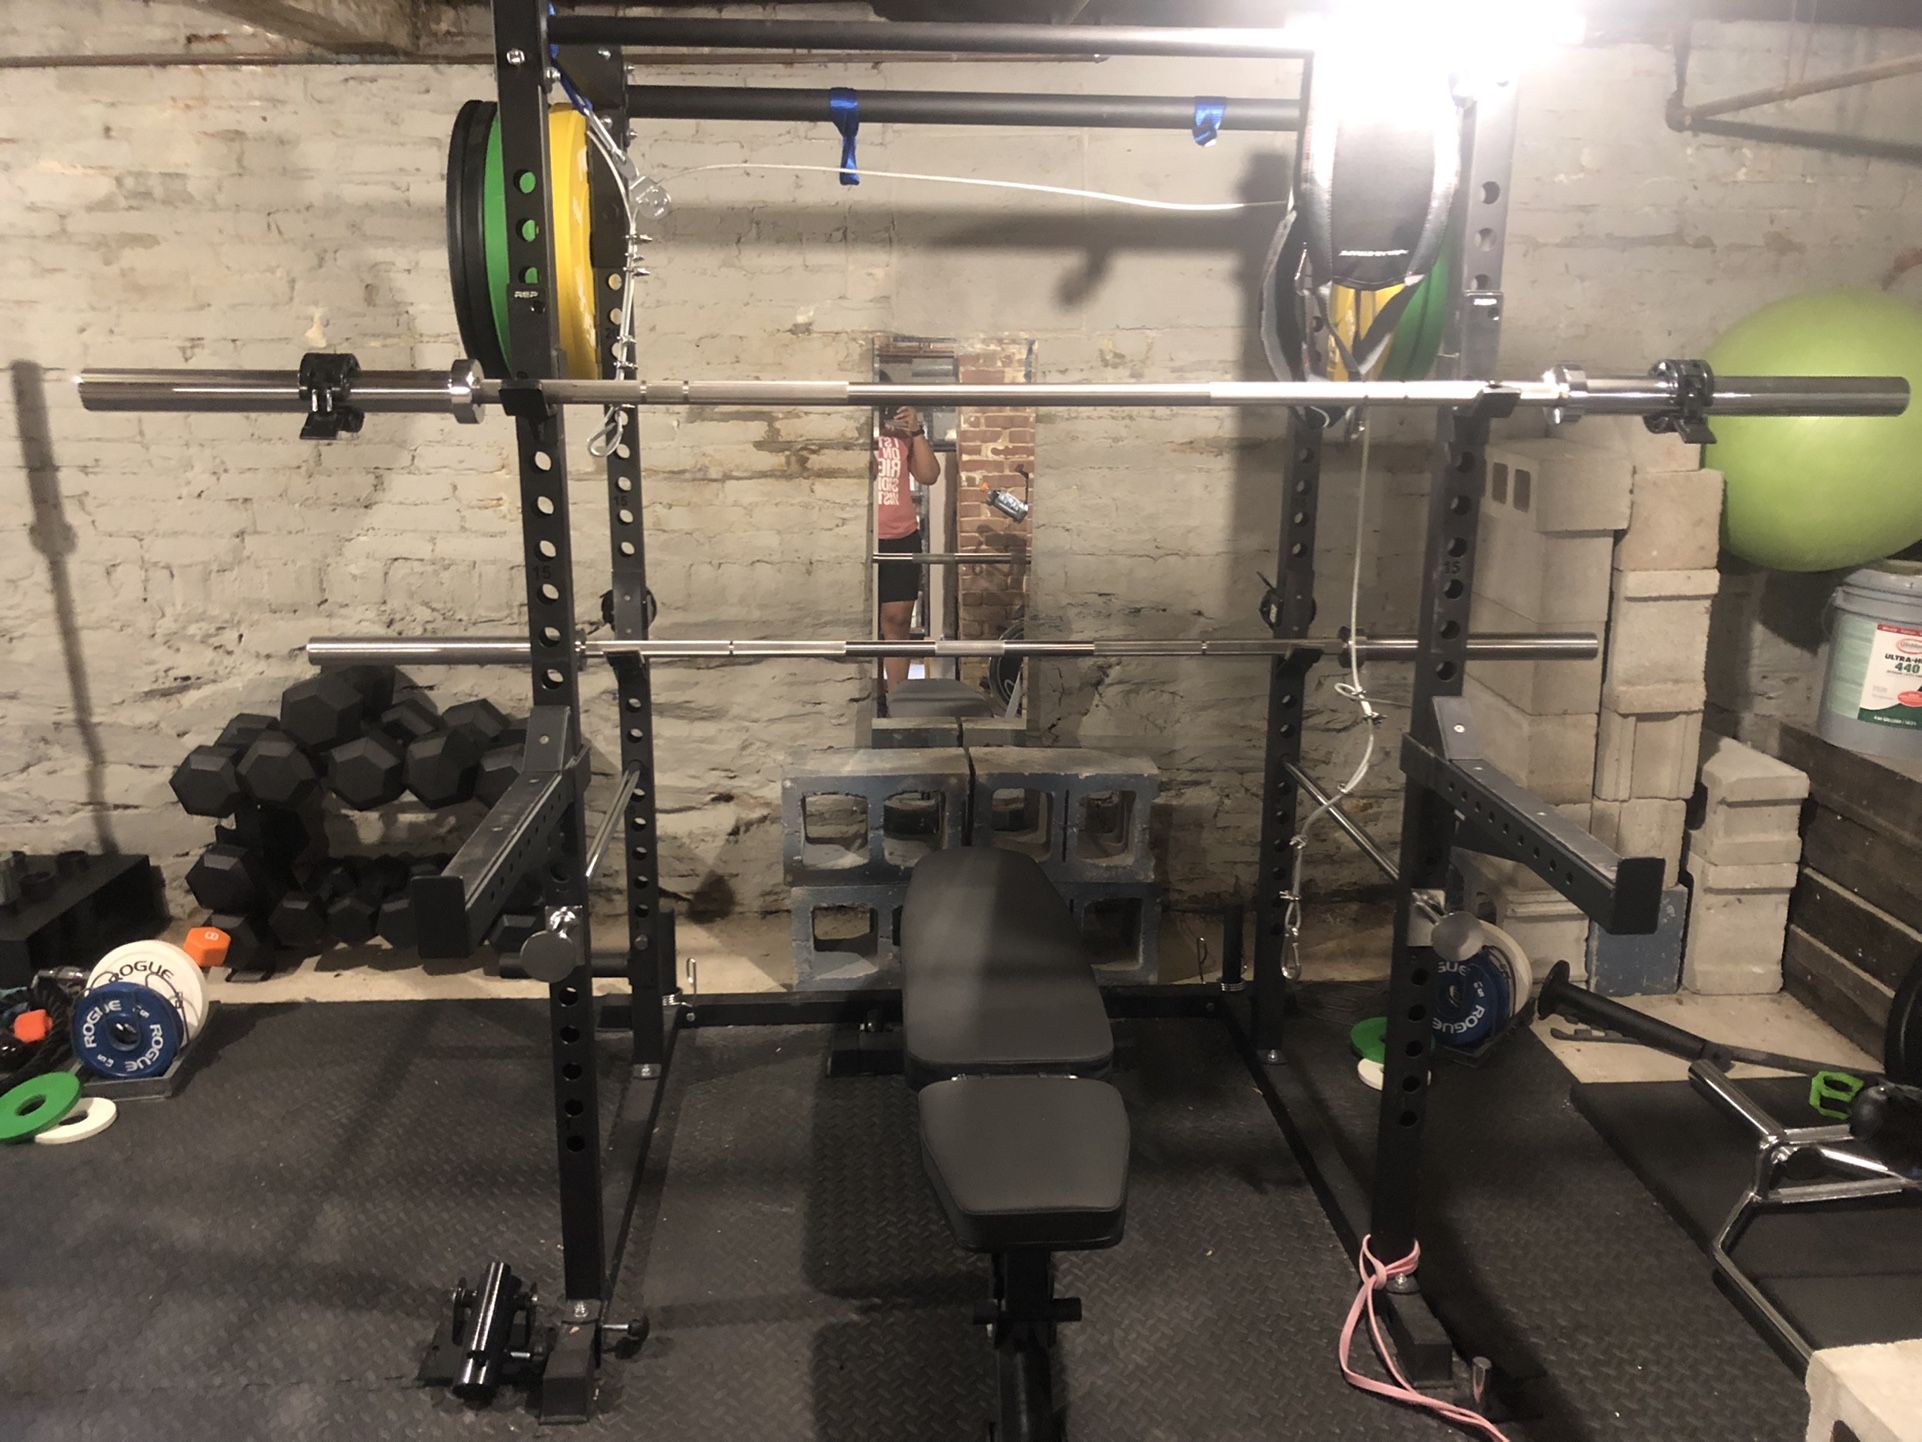 Rep PR 1050 Rack, extra spotter arms, 2 Pair Of J Cups, 2 Sets Of Weight Horns 